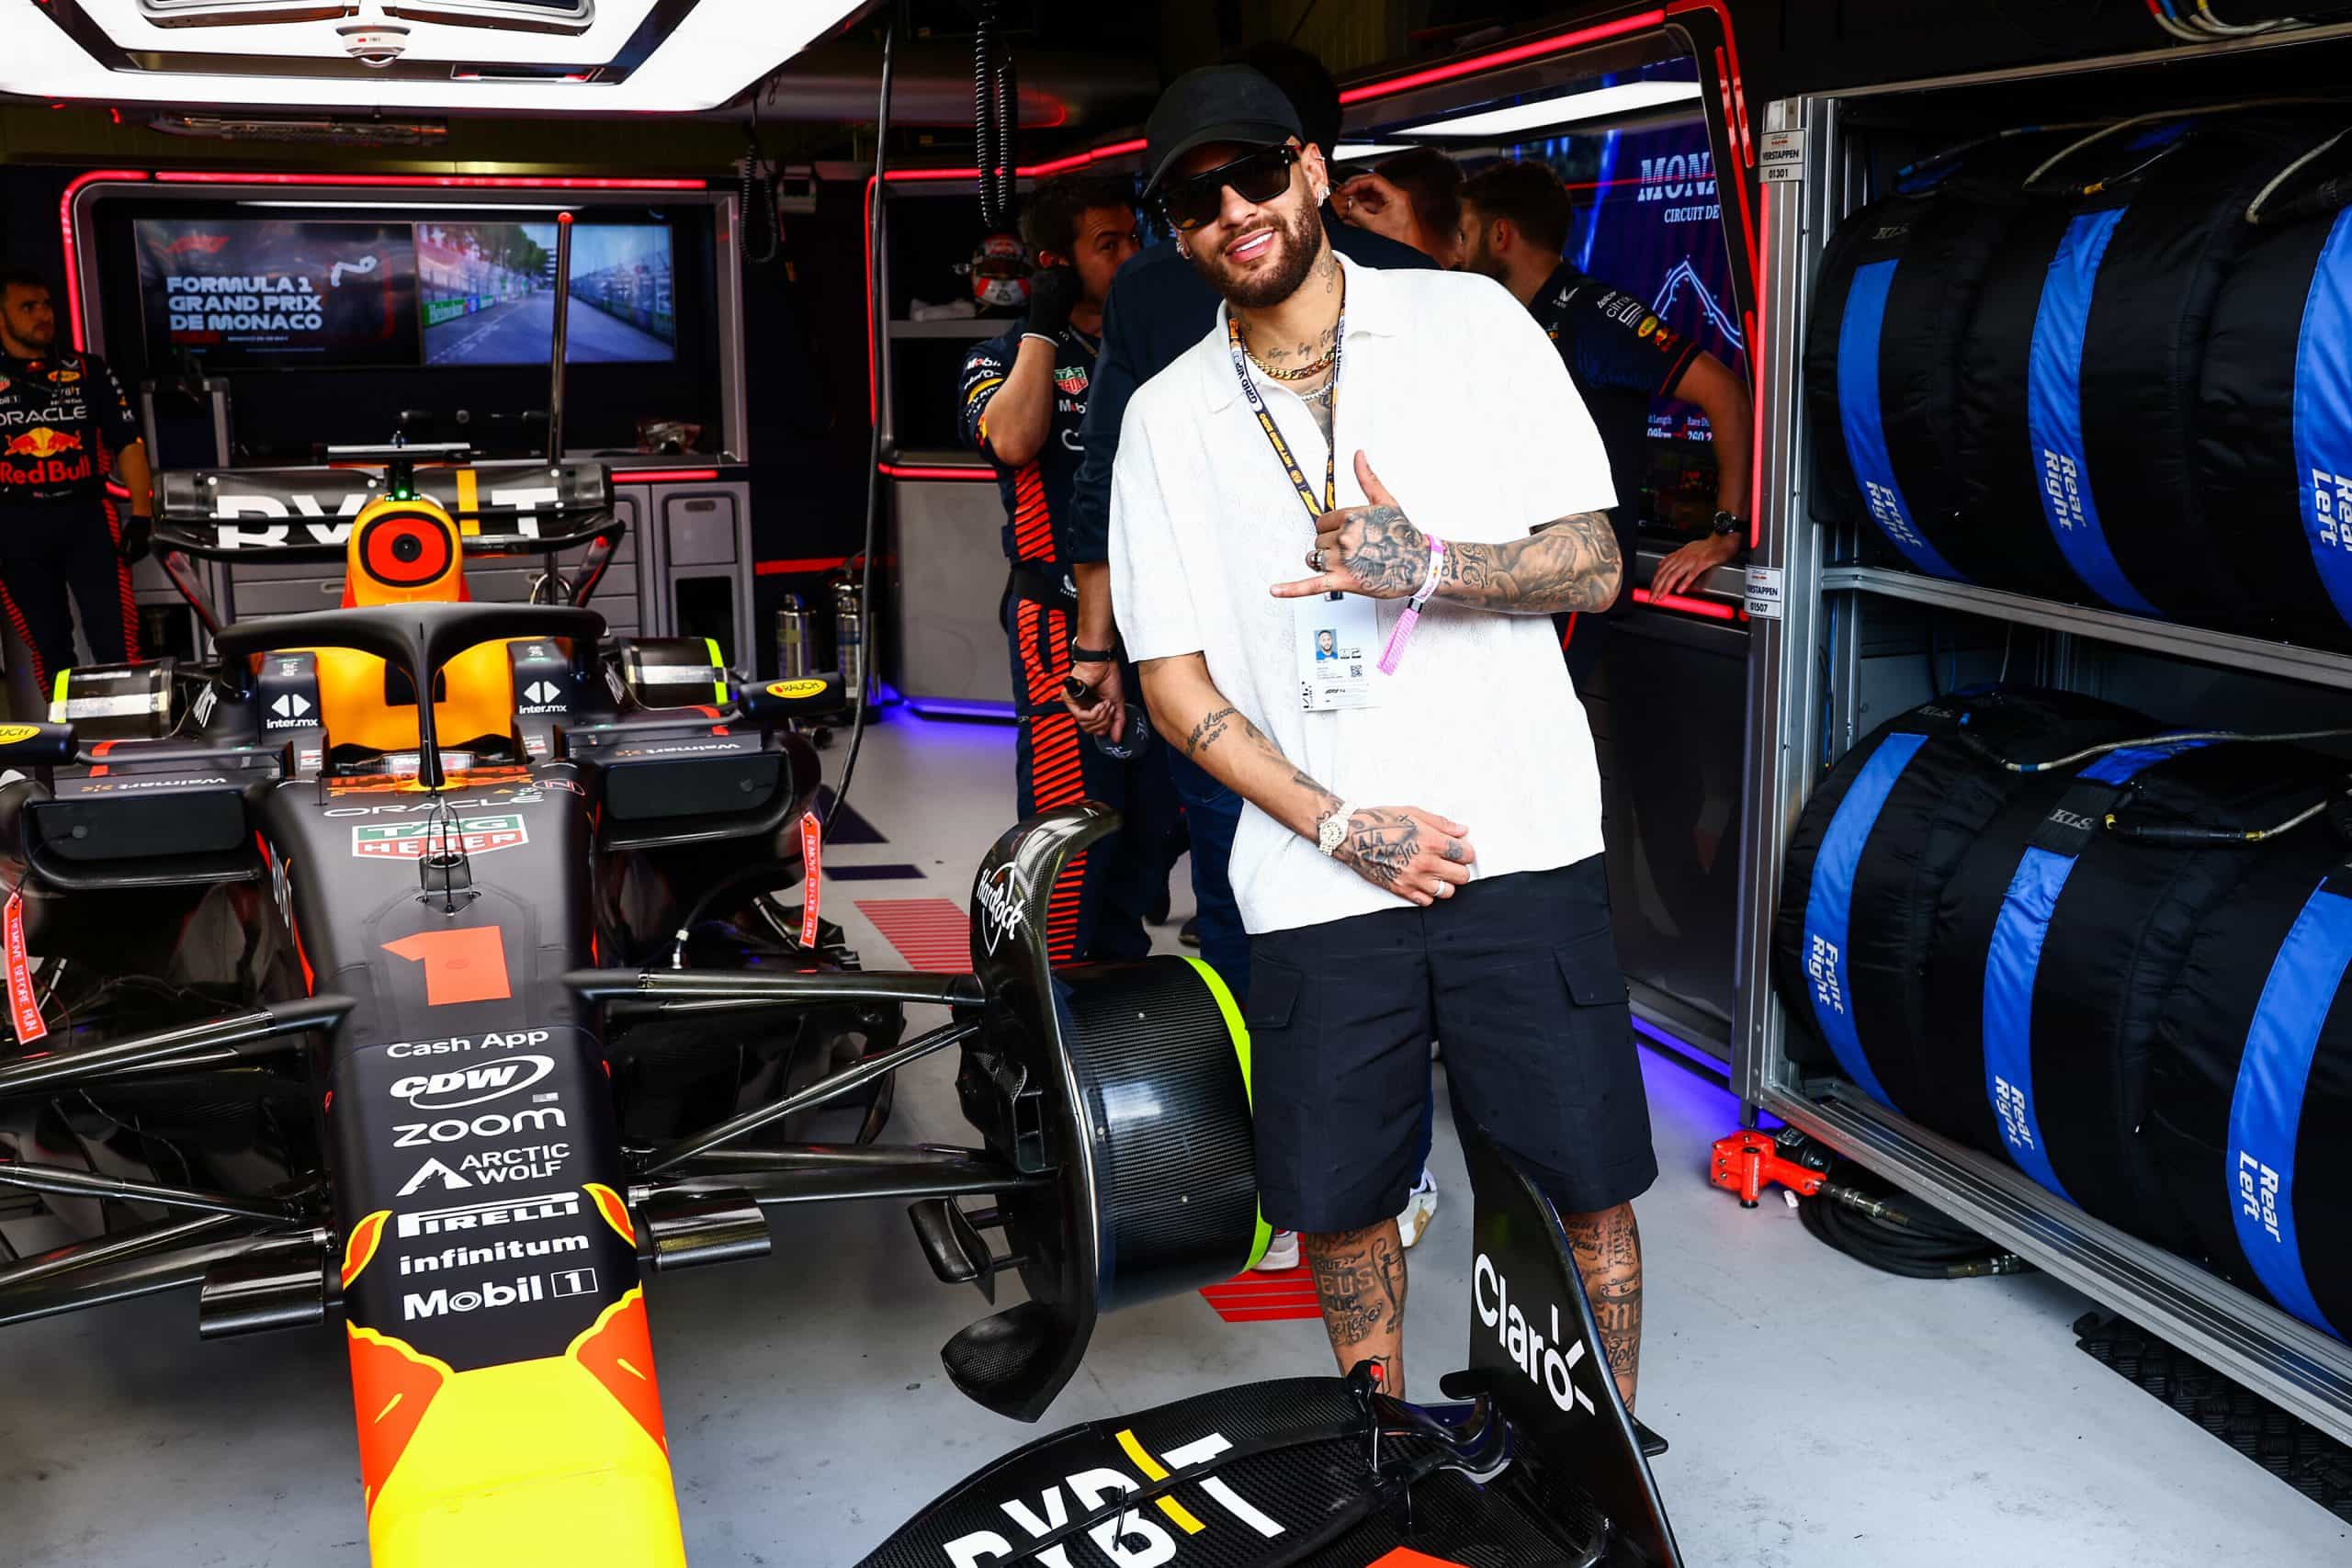 Footballer Neymar poses for a photo next to Max Verstappen’s F1 car at the 2023 Monaco Grand Prix.